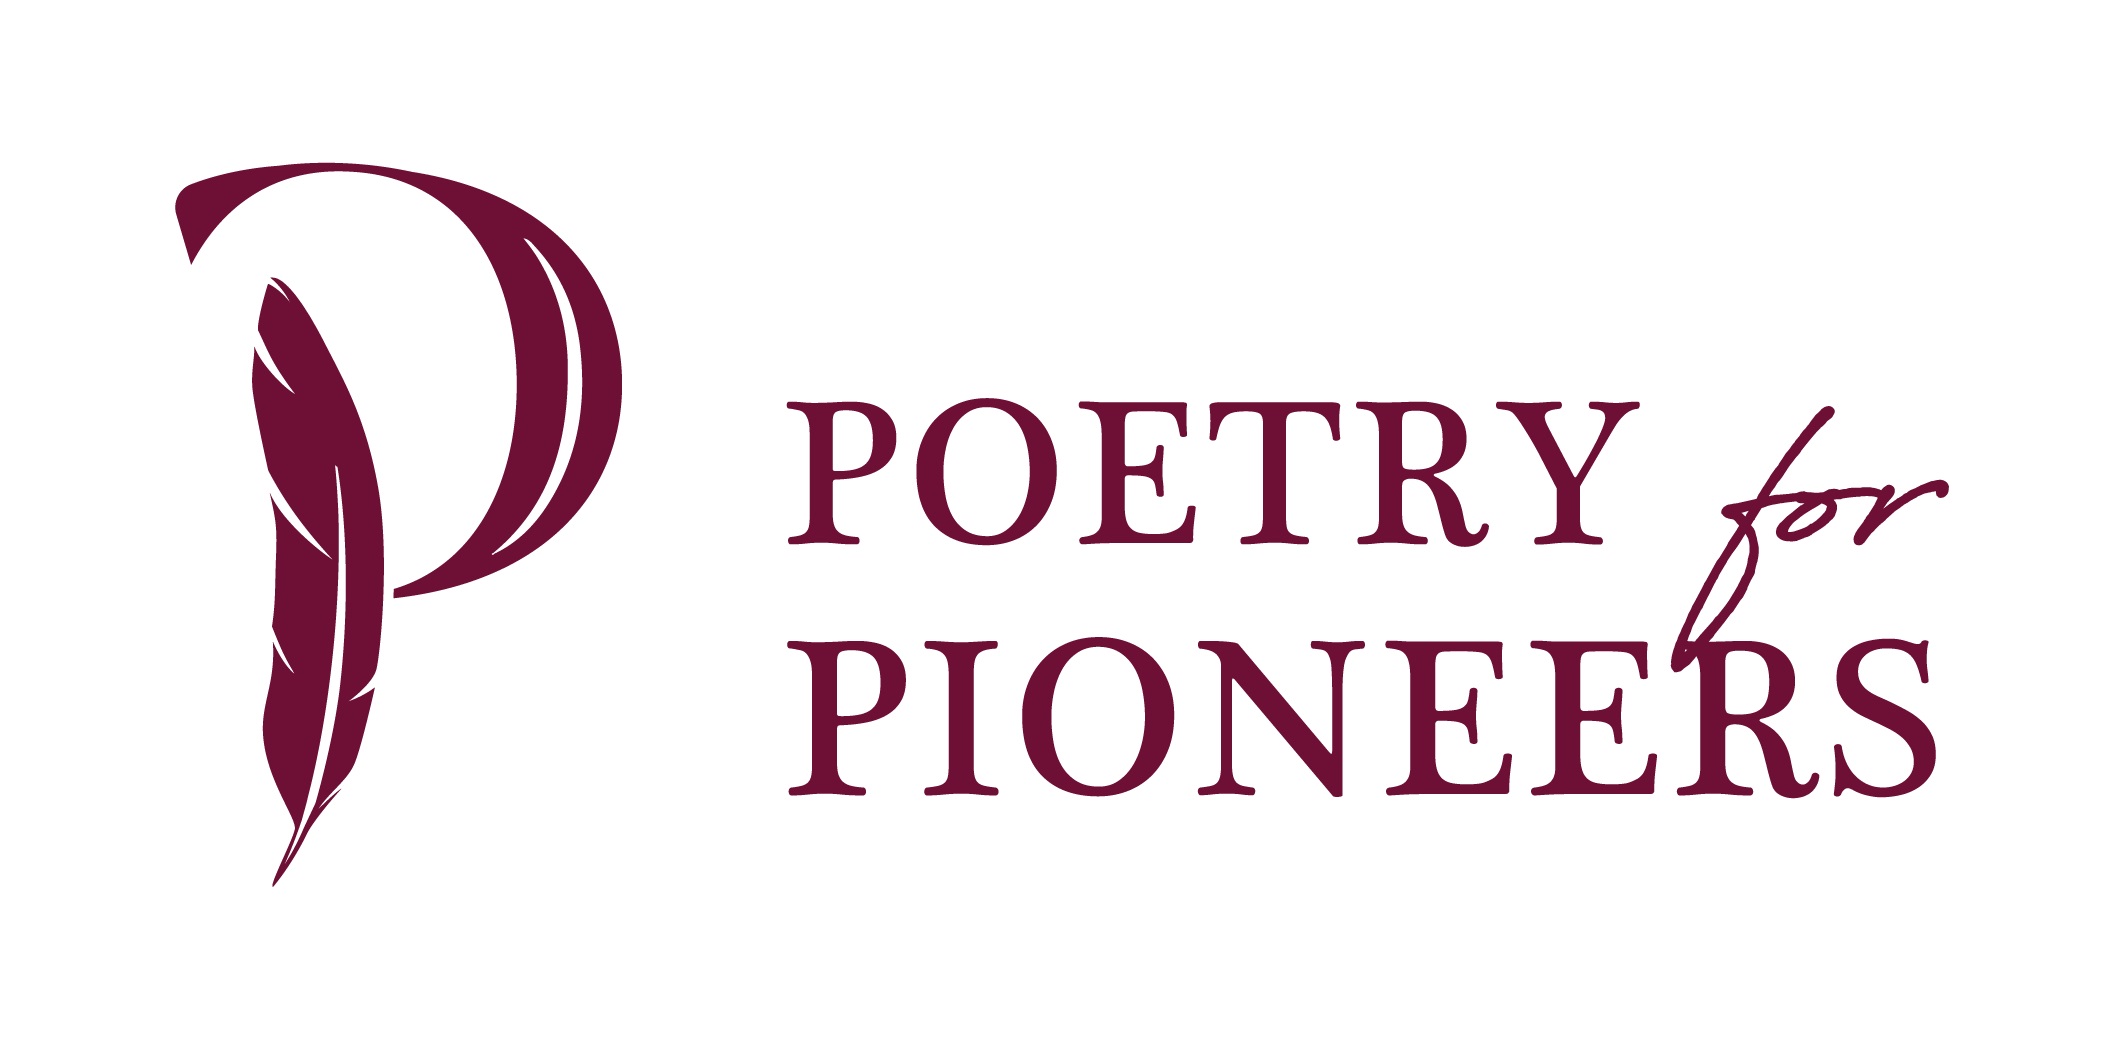 12-astounding-facts-about-poetry-for-pioneers